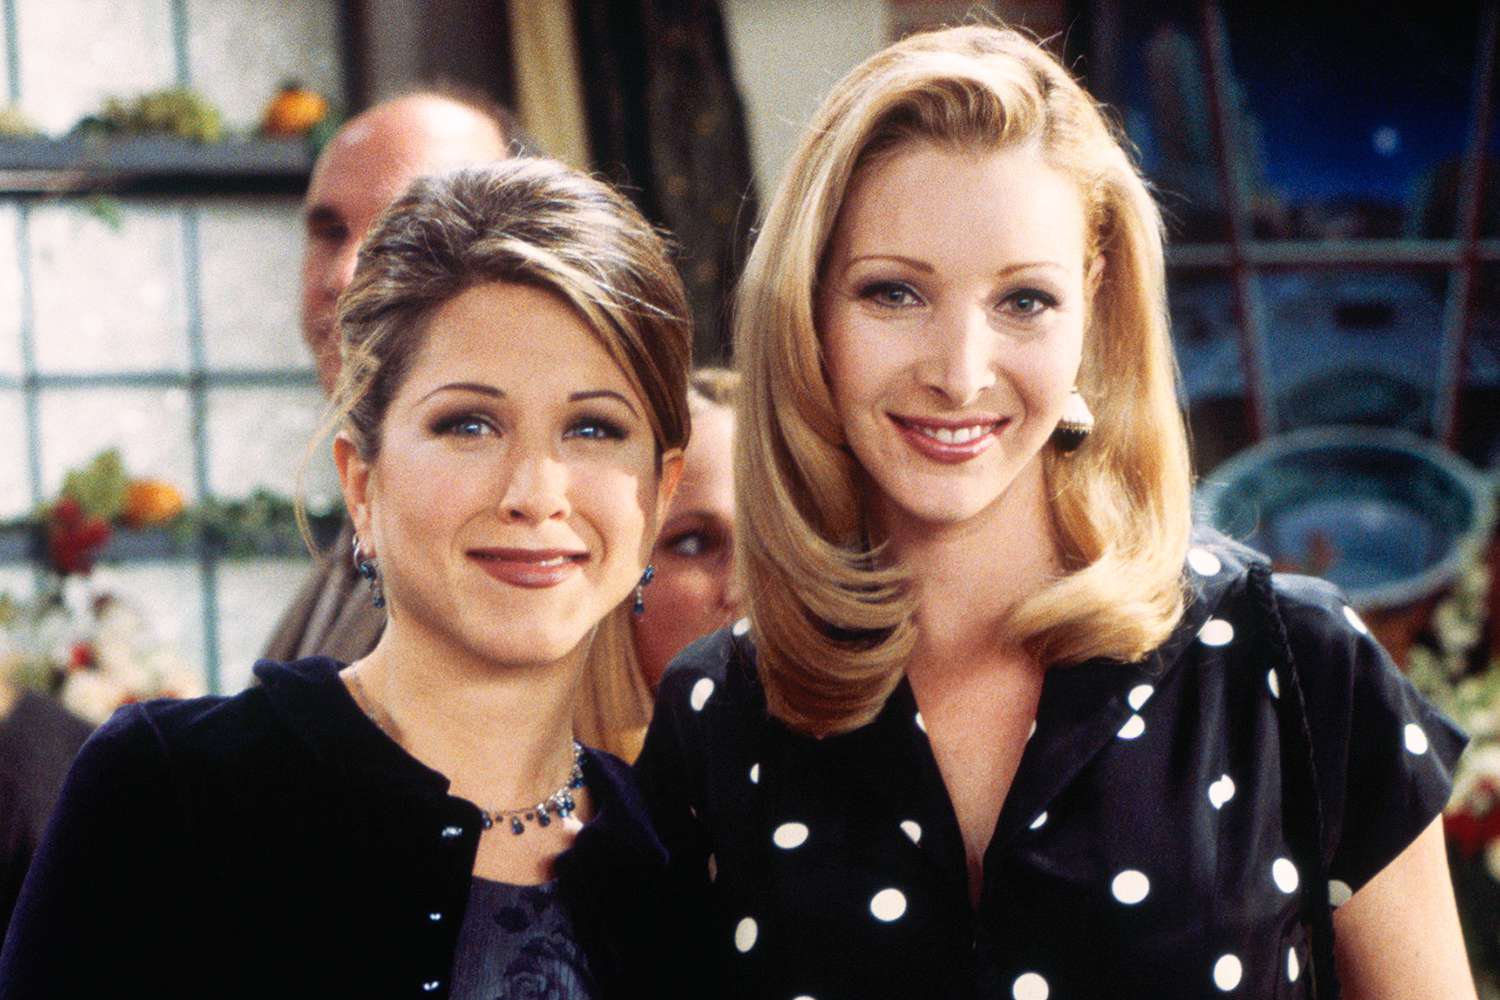 Jennifer Aniston Reveals Lisa Kudrow 'Hated When the Audience Laughed' While Filming 'Friends'